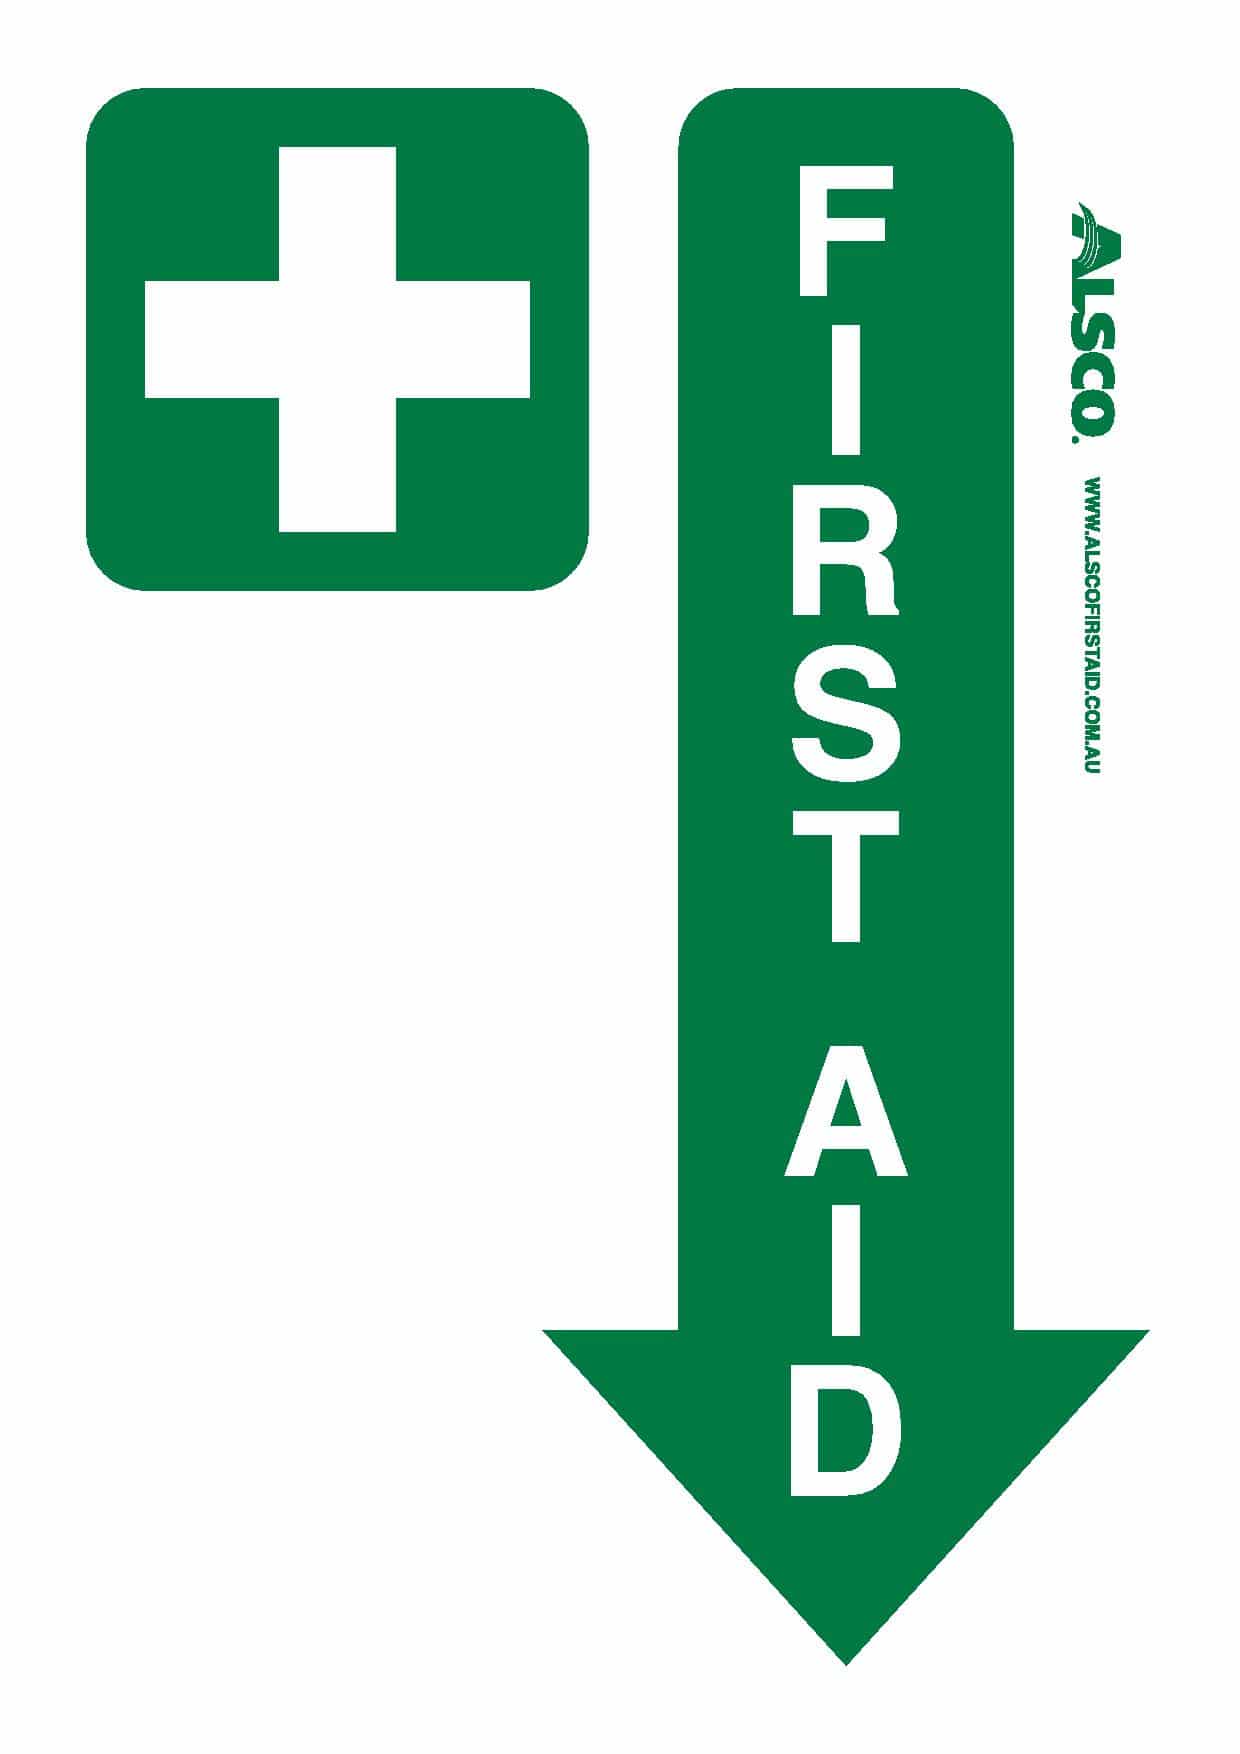 multiple-first-aid-signs-free-poster-download-alsco-first-aid